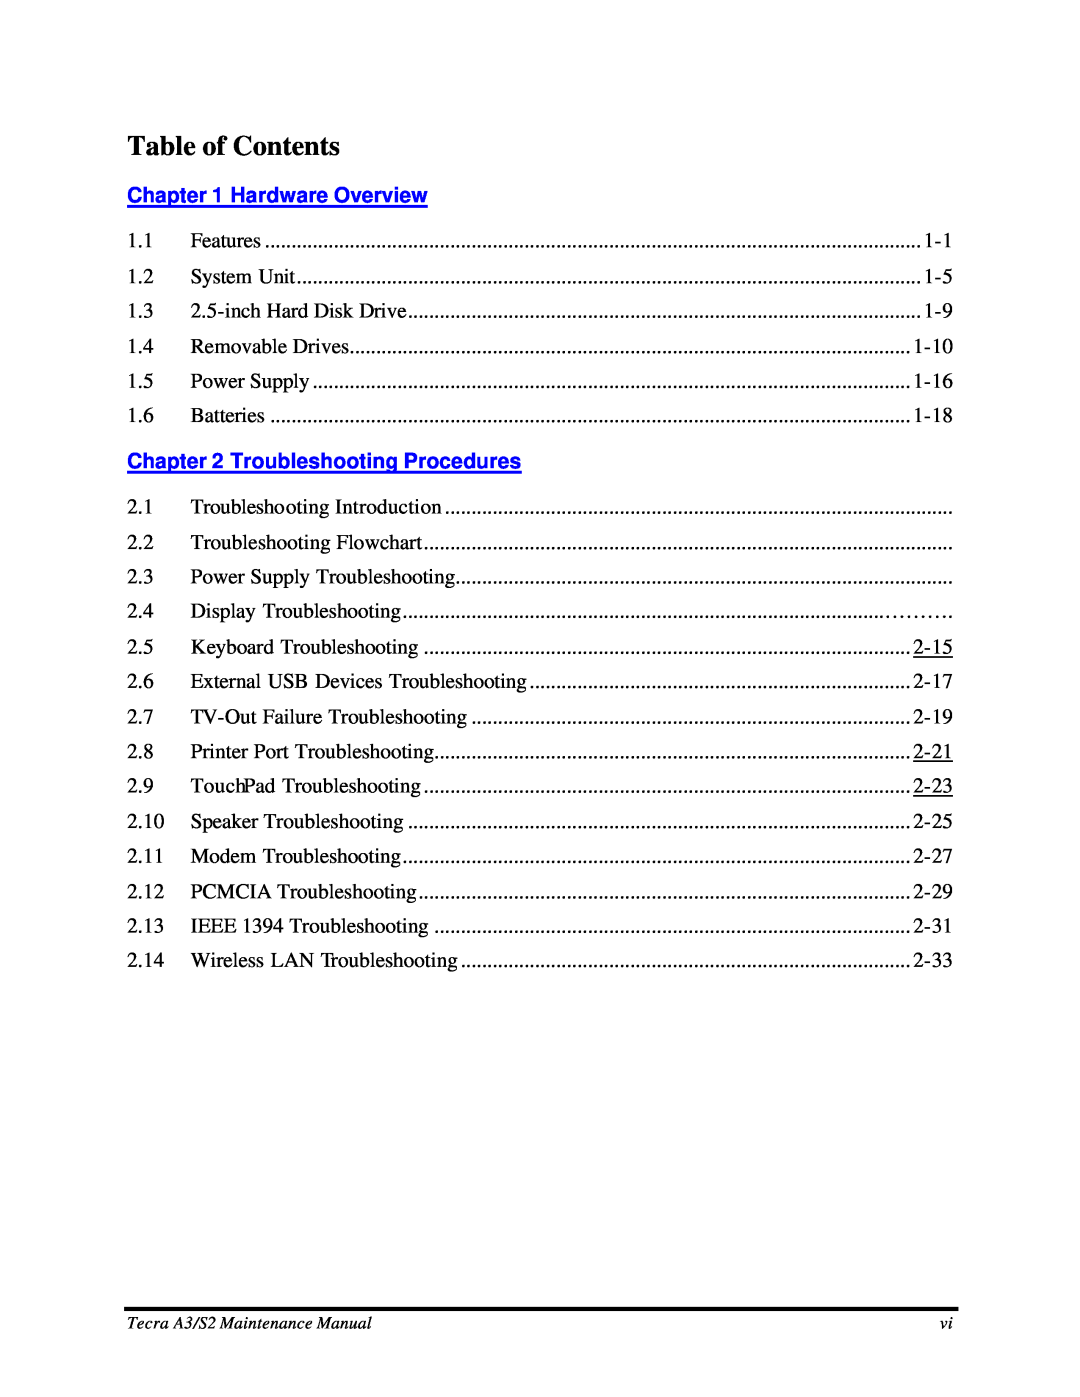 Toshiba S2 manual Table of Contents, Hardware Overview, Troubleshooting Procedures 